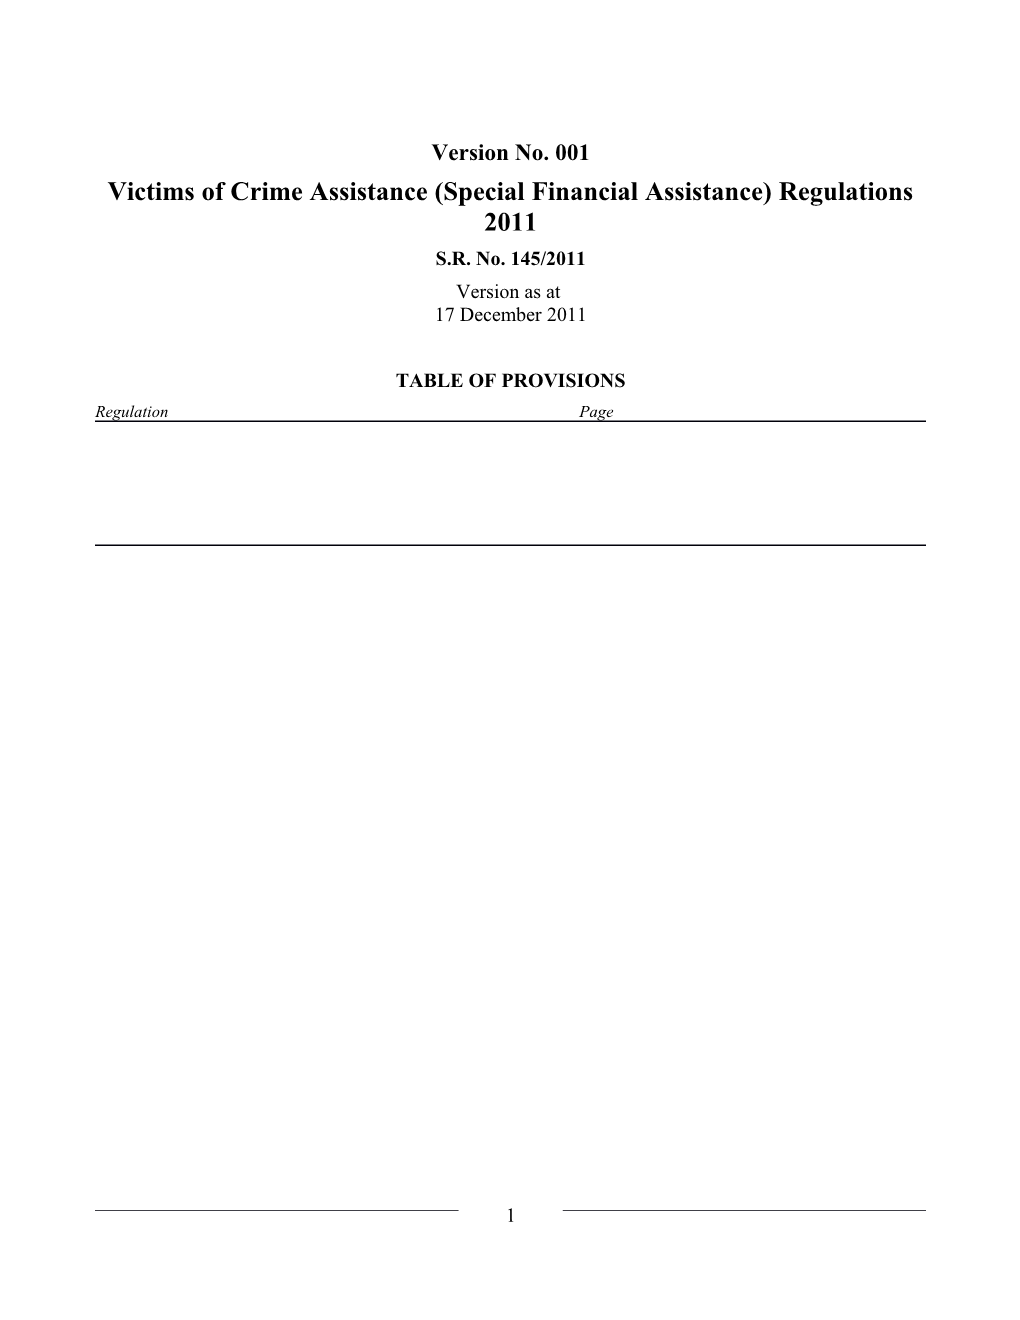 Victims of Crime Assistance (Special Financial Assistance) Regulations 2011